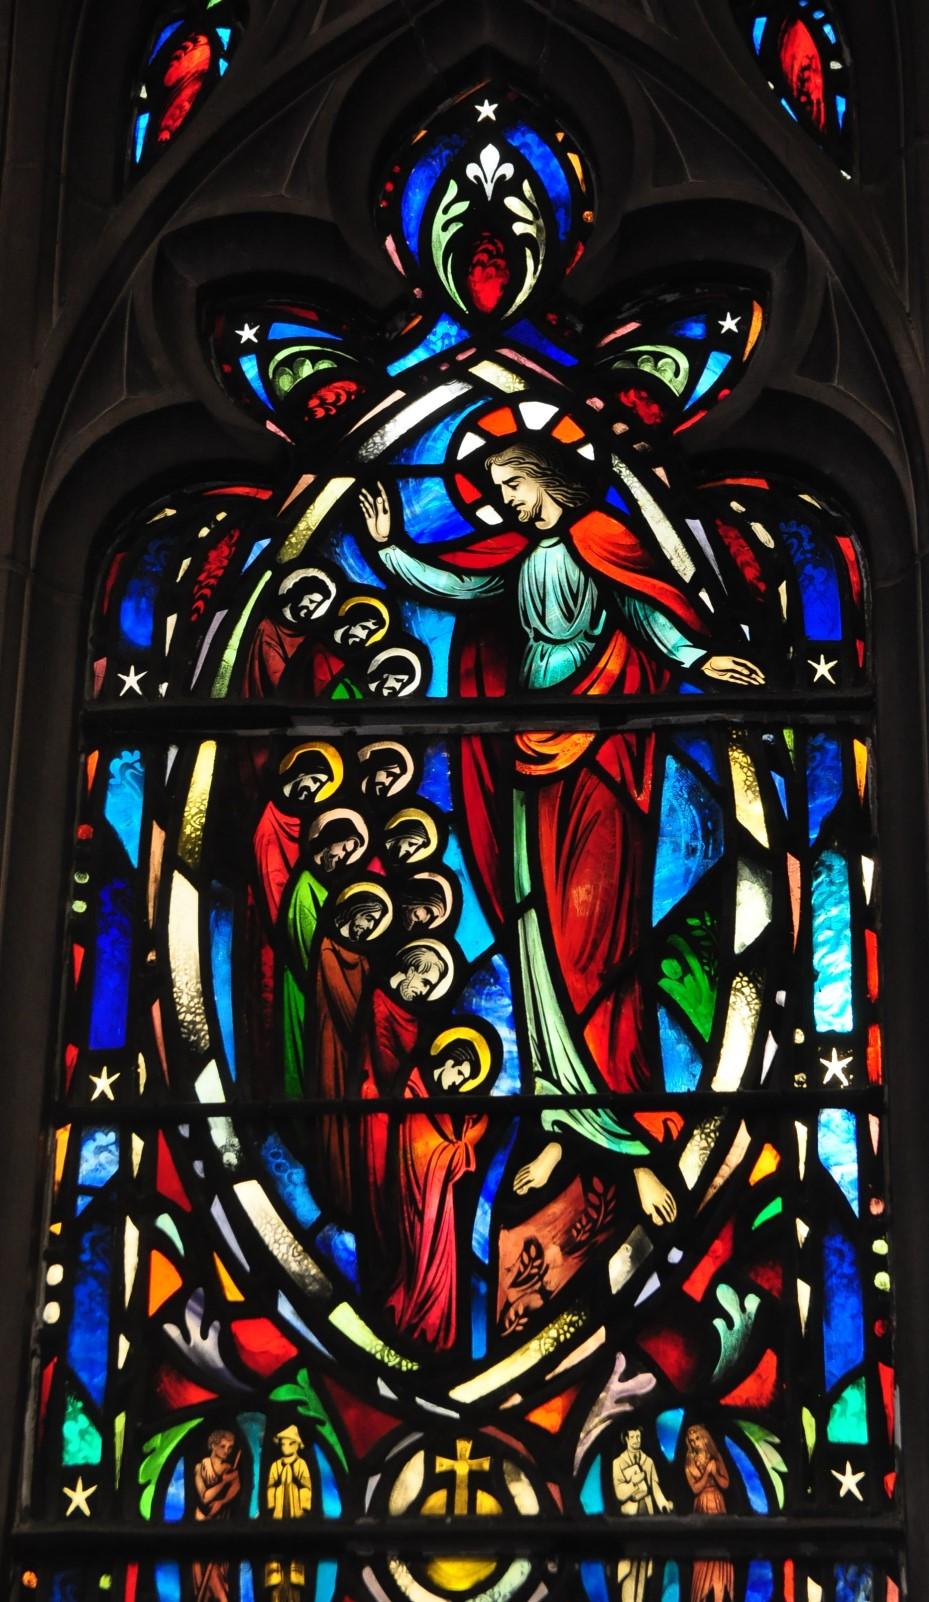 The Mission Window: This window, the center aisle window on the right, is devoted to the Christian Mission. In the lower medallion, Paul is shown preaching at Athens on Mars Hill.